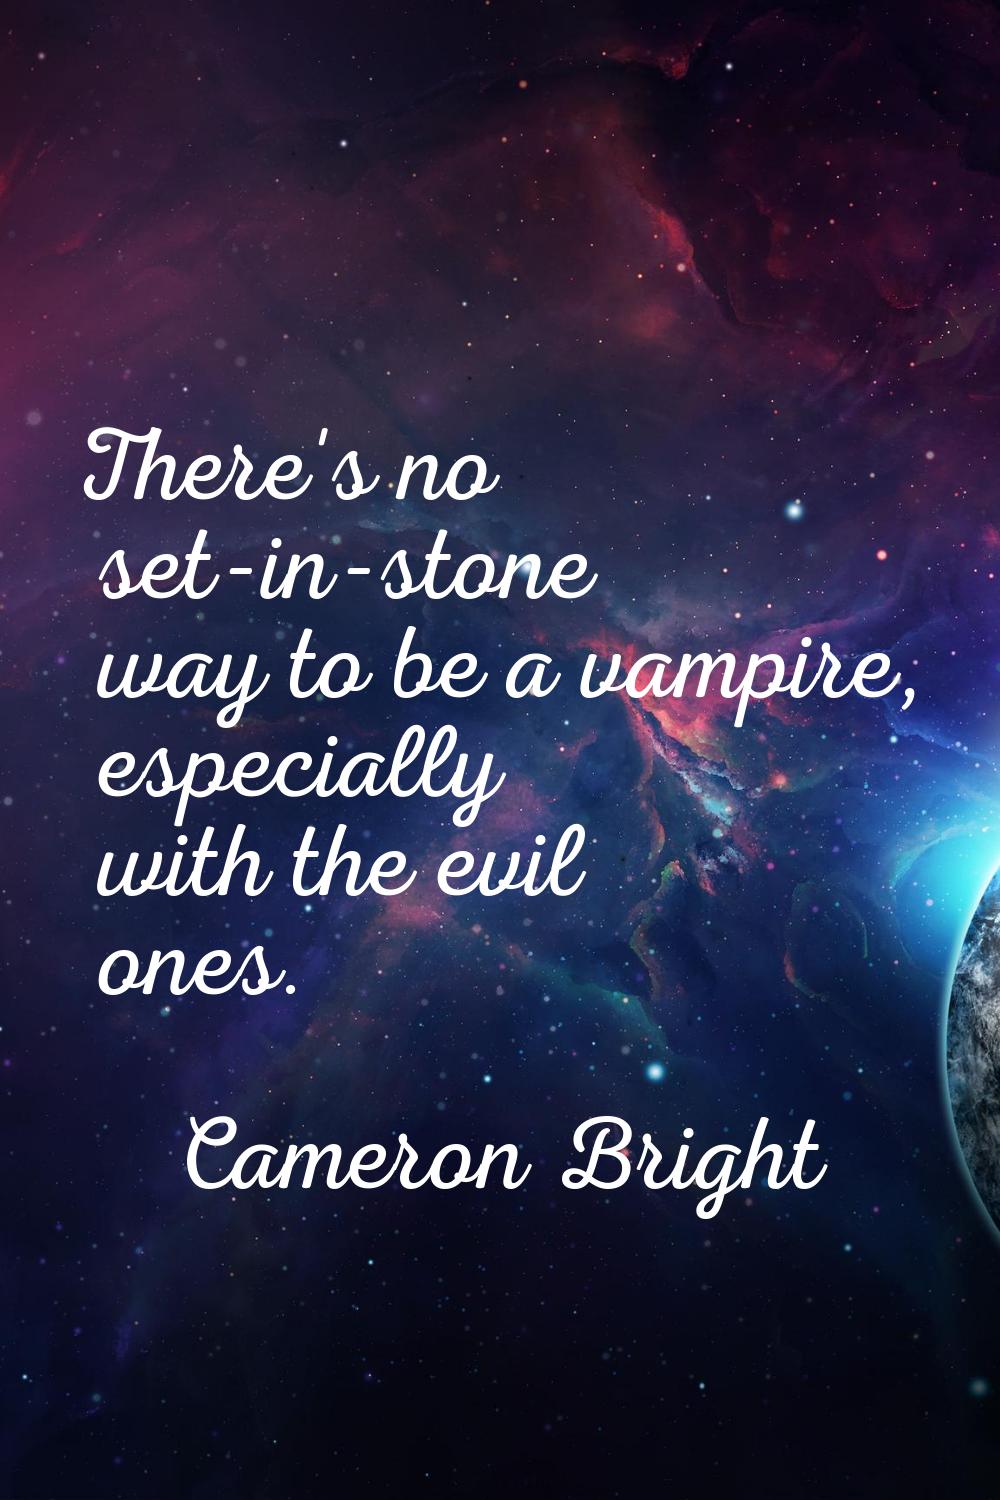 There's no set-in-stone way to be a vampire, especially with the evil ones.